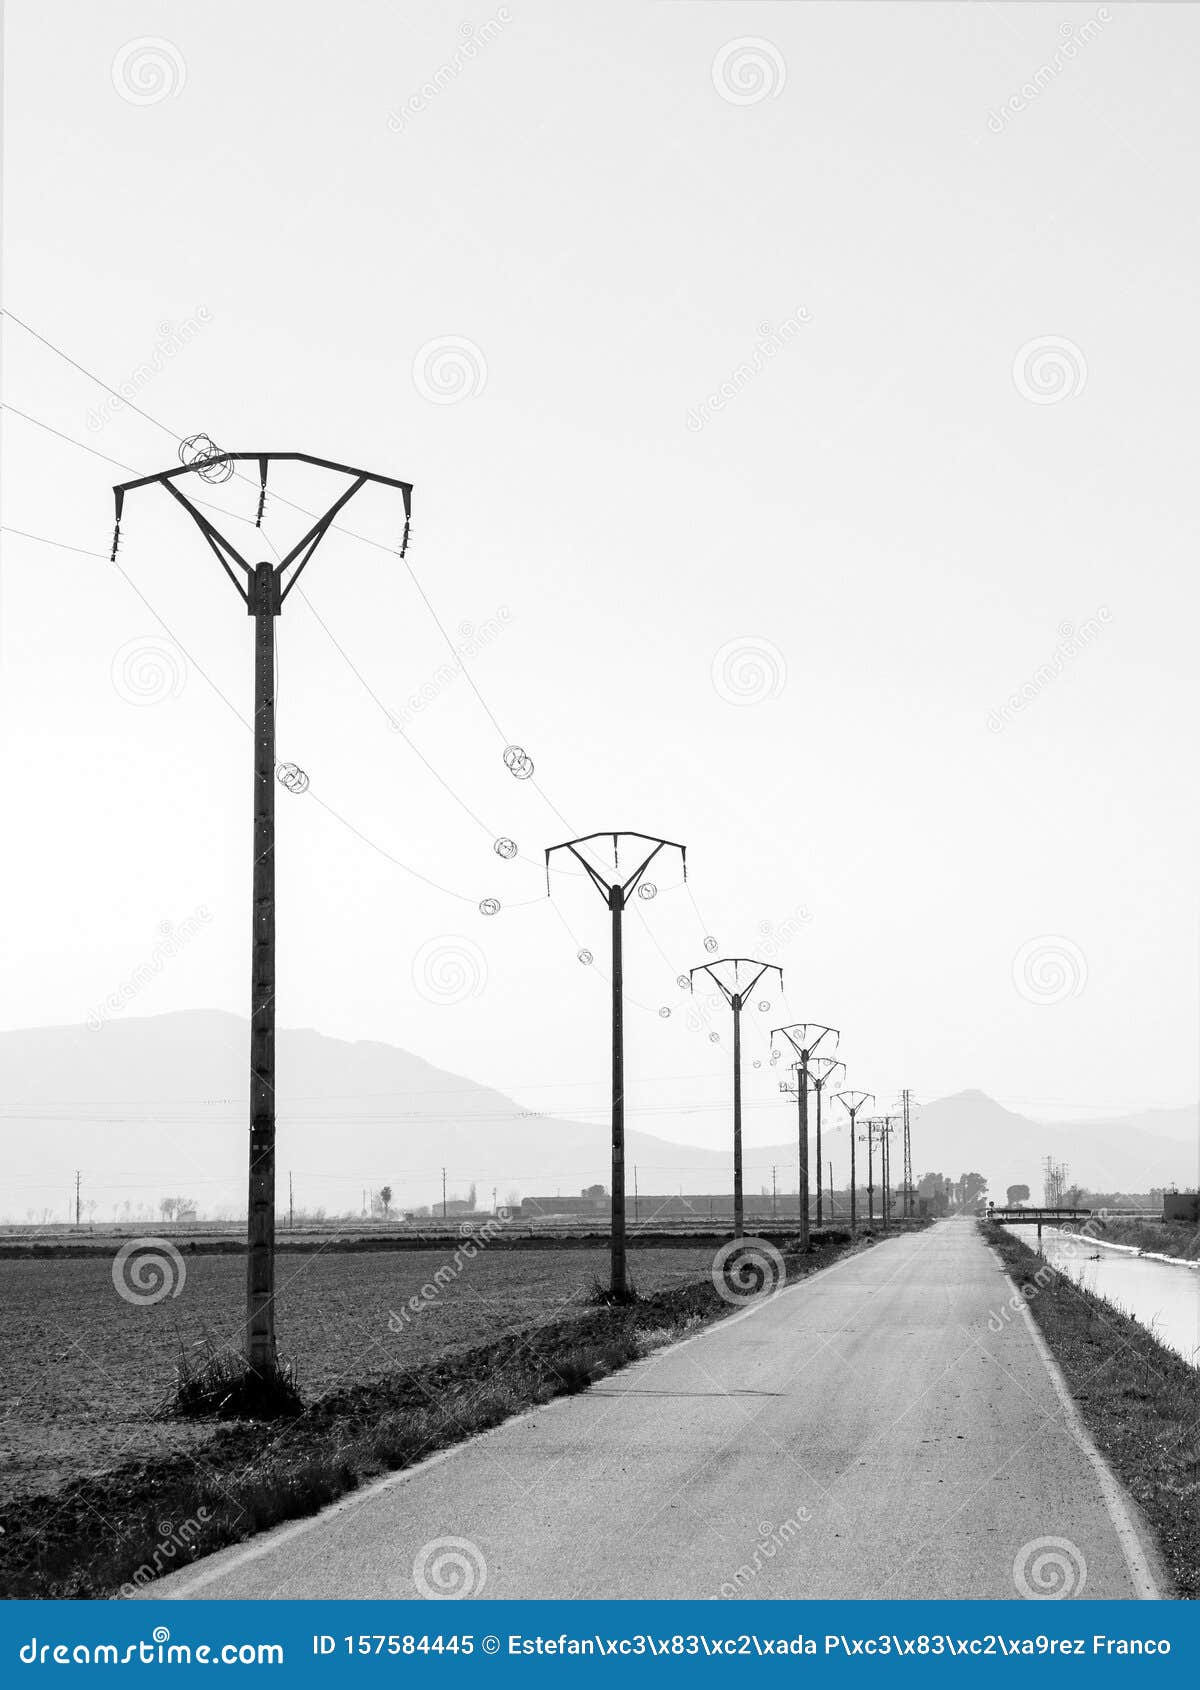 transmission towers, power posts near a road